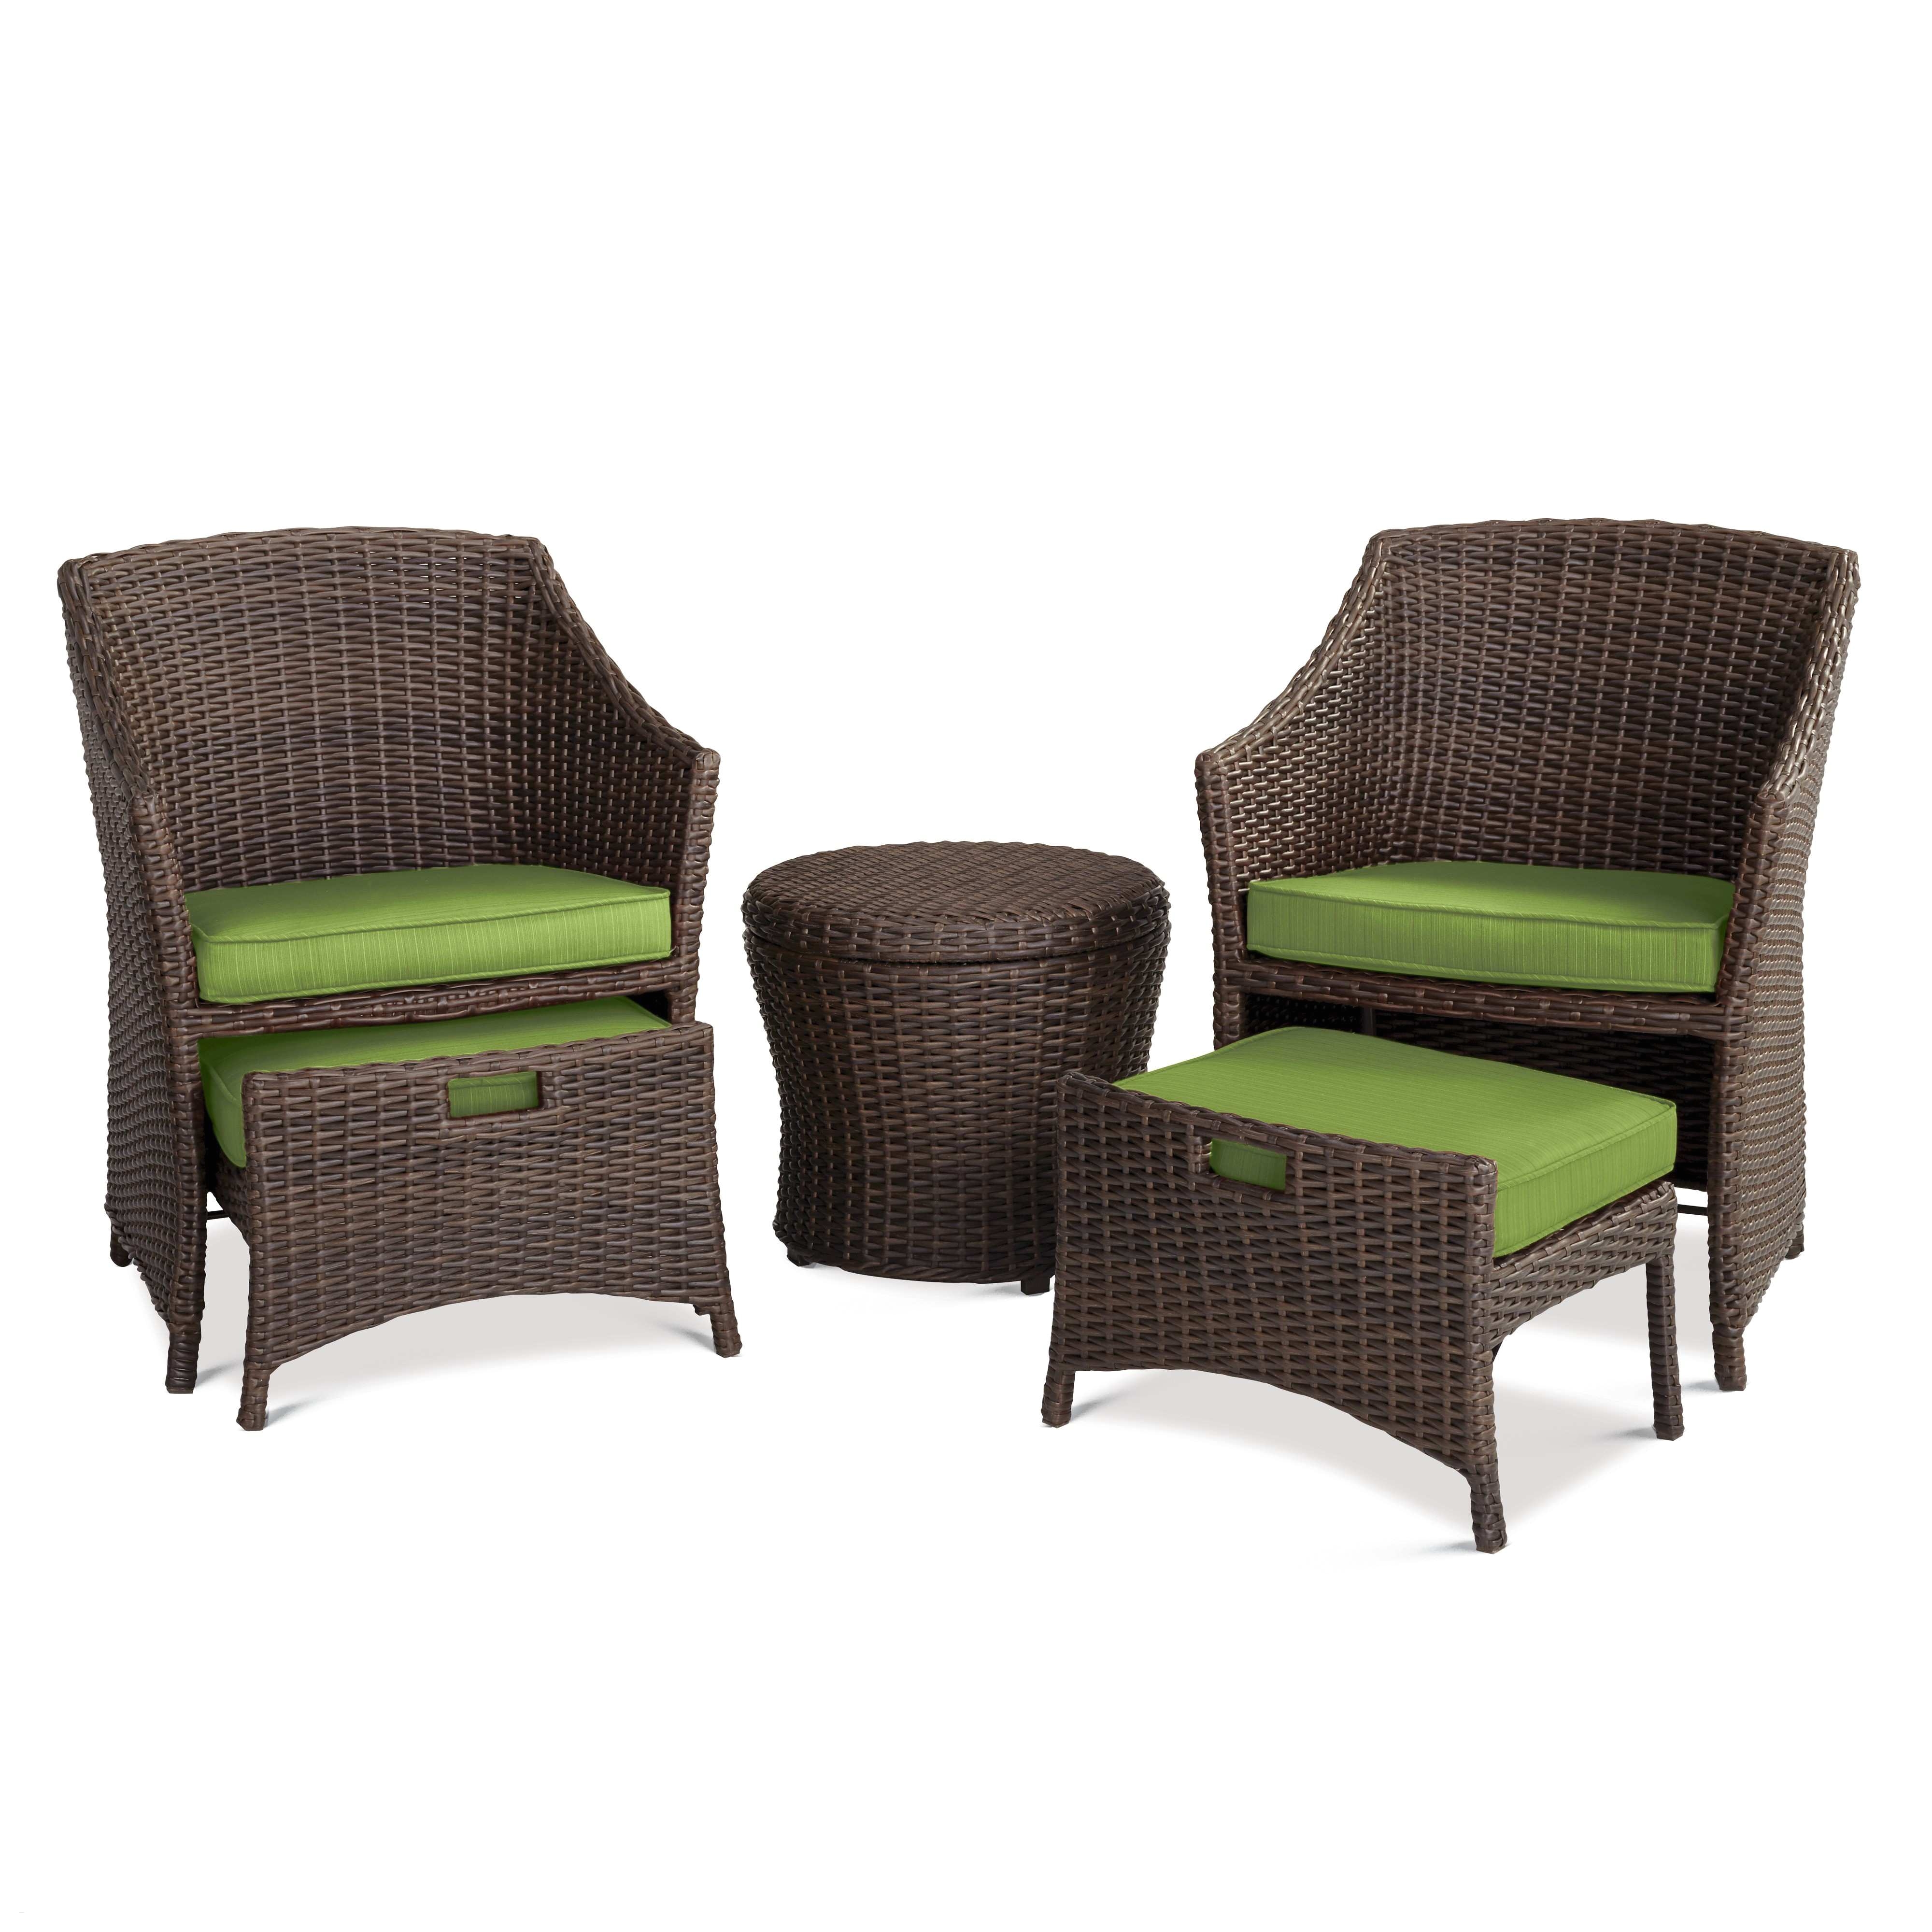 outdoor furniture clearance unique surprising wicker furniture sets 2 chair patio set elegant wicker